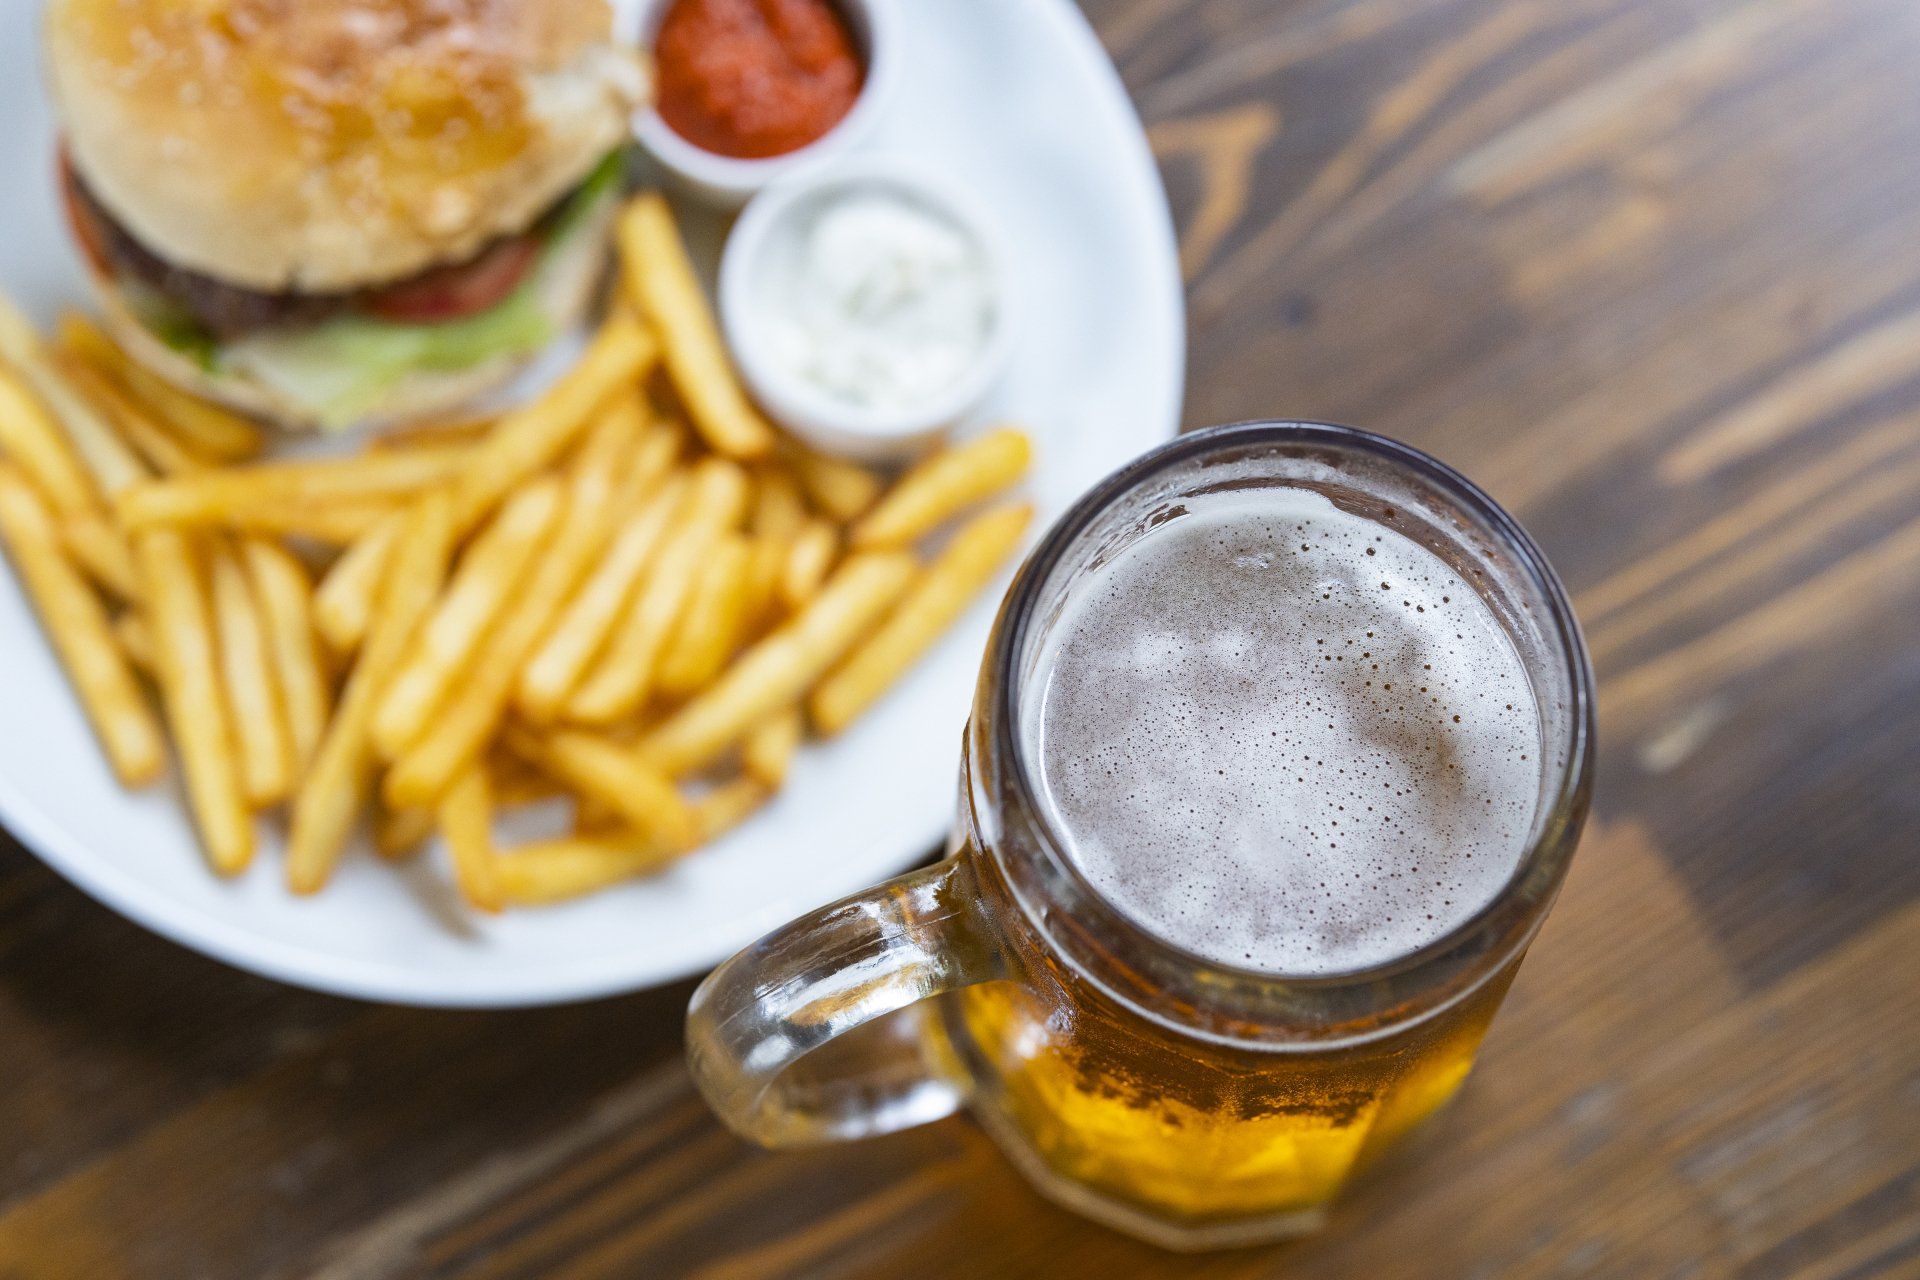 a plate of french fries and a hamburger next to a glass of beer on a wooden table .